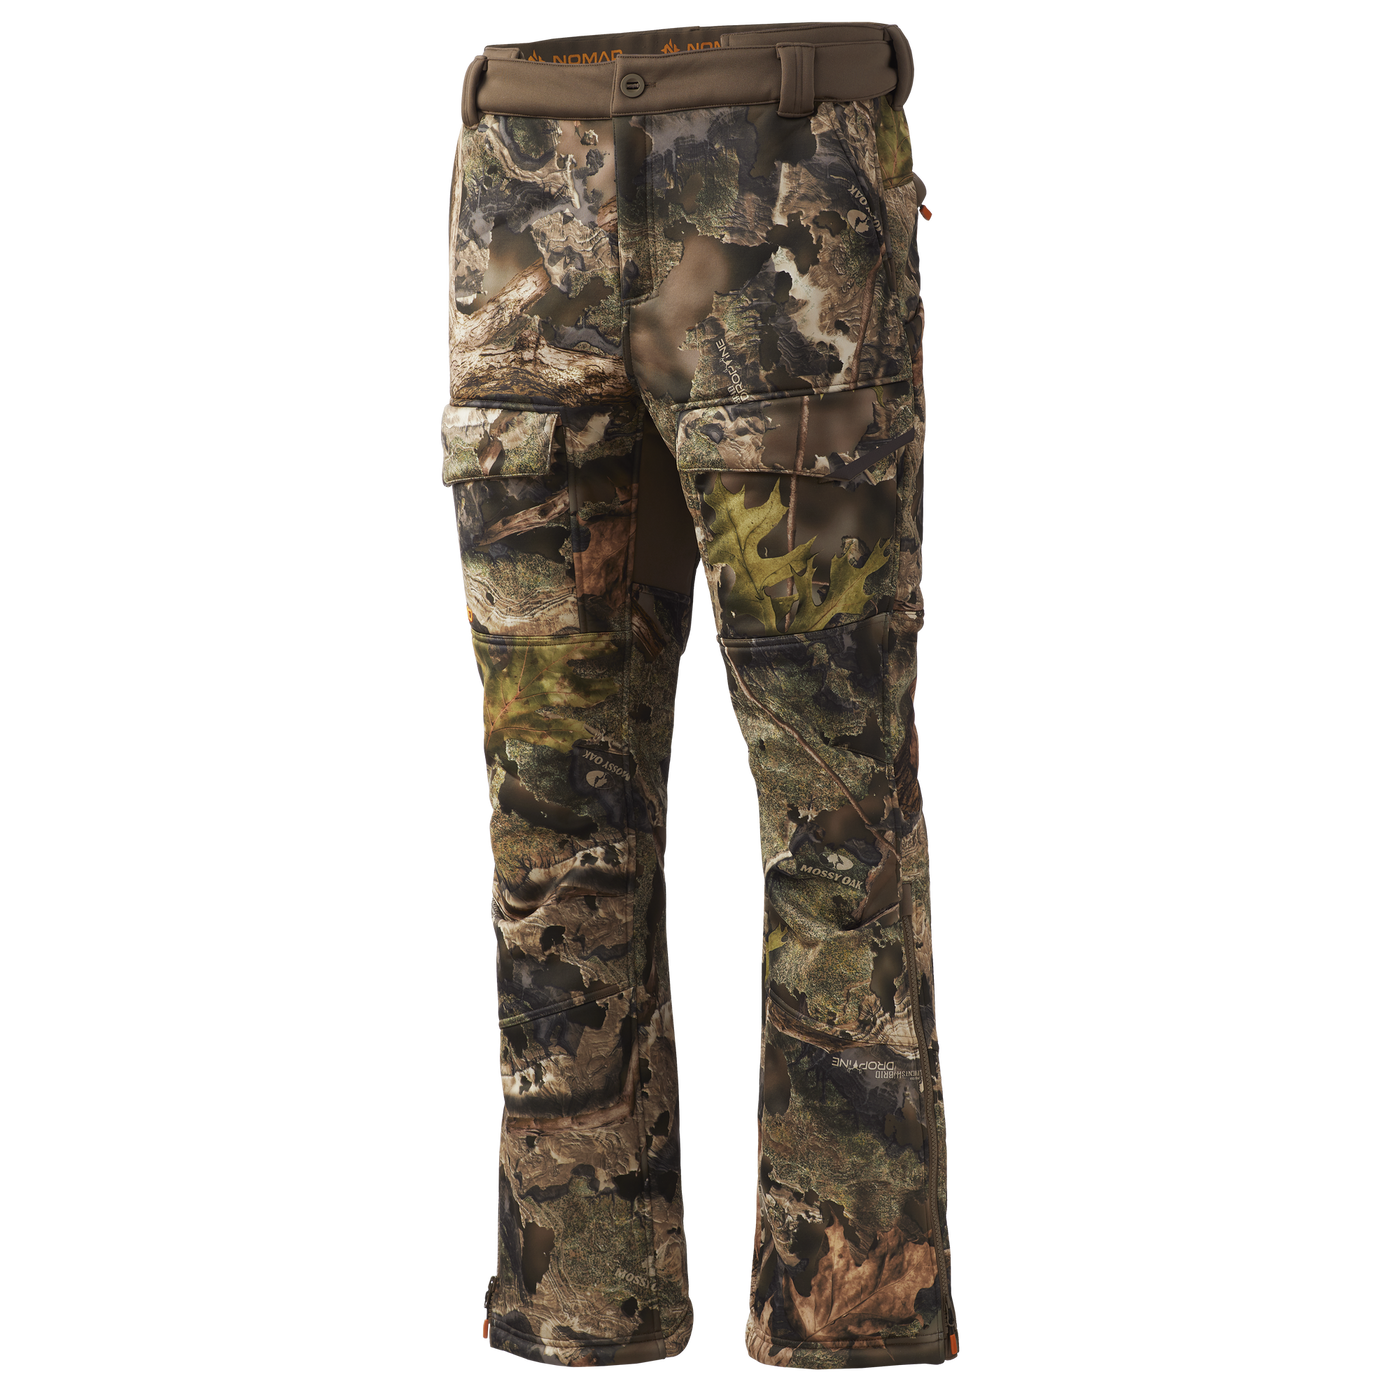 Nomad Harvester NXT Pant